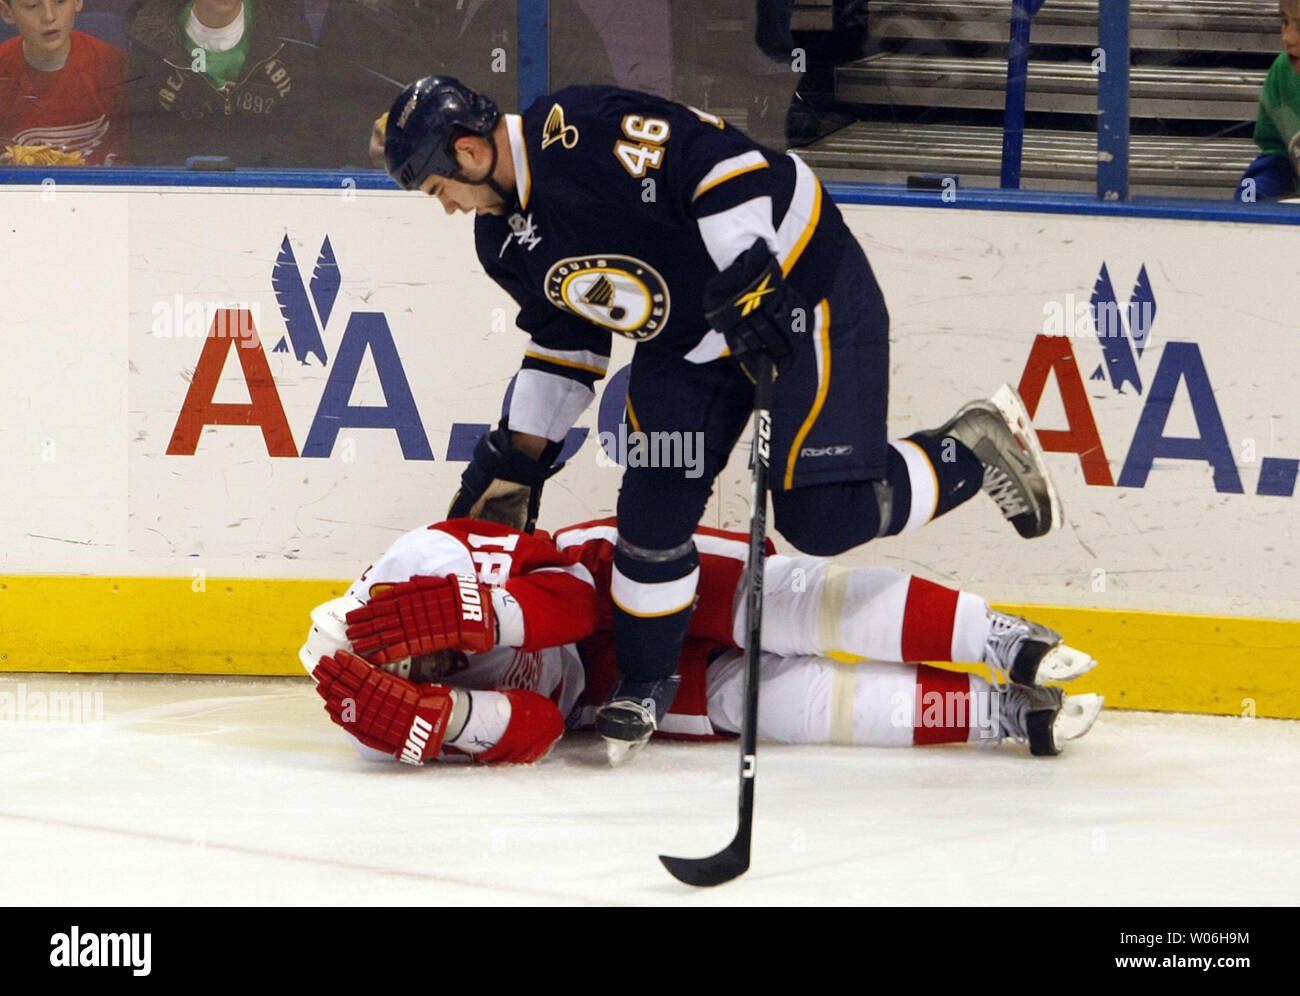 St. Louis Blues Roman Polak (R) bends down to check on Detroit Red Wings Marian Hossa after the two collide in the first period at the Scottrade Center in St. Louis on March 3, 2009. Hossa was removed from the ice on a stretcher and taken to a local hospital where his condition is not yet known.   (UPI Photo/Bill Greenblatt) Stock Photo